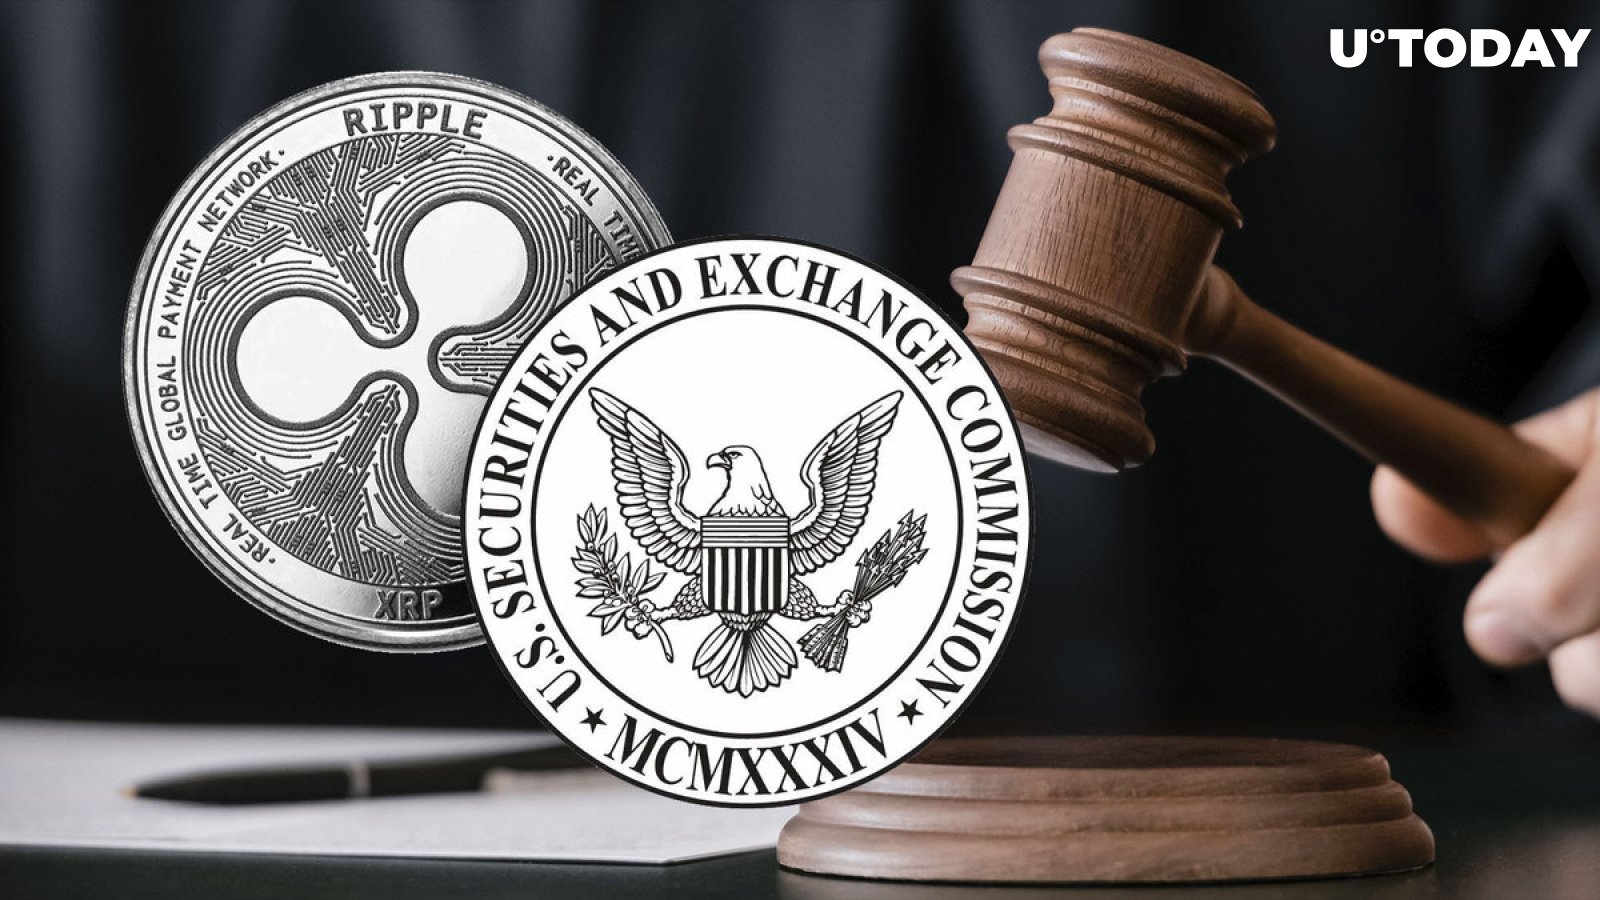 Ripple v. SEC: XRP Holders' Support Felt With 3,000 Affidavits Submitted